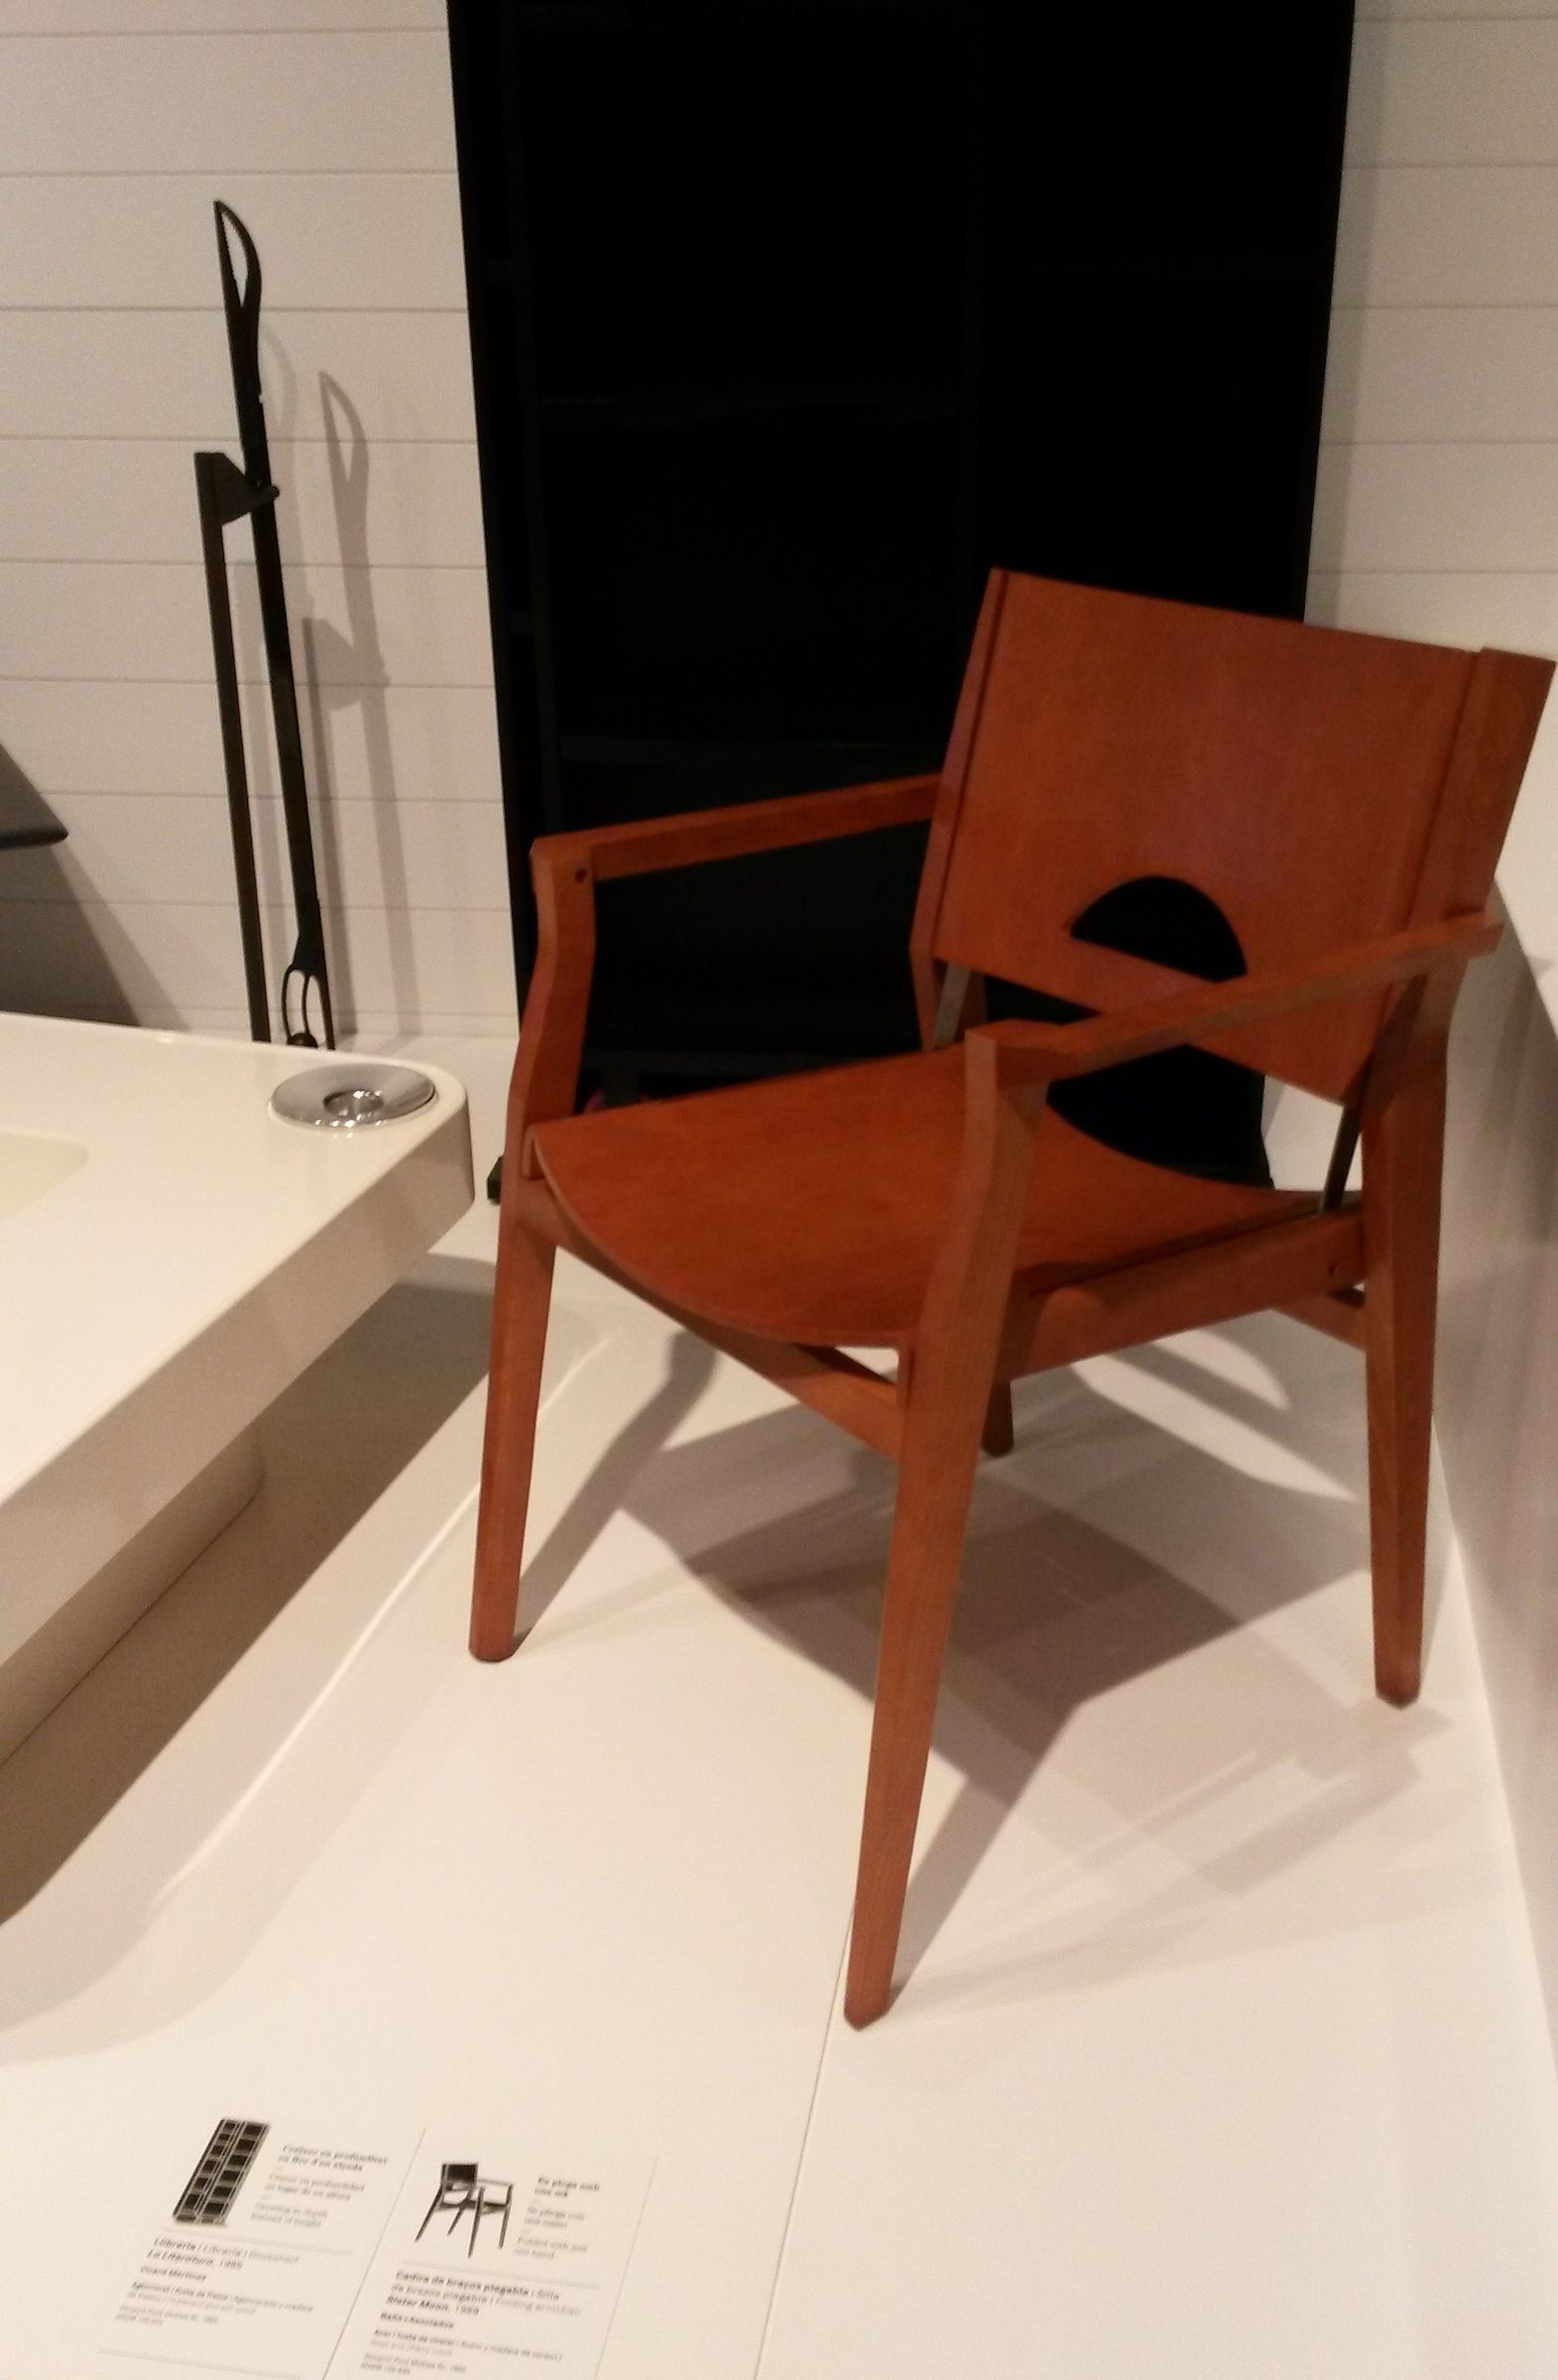 Sister Moon chair, cultural heritage in the permanent collection in the Design Museum of Barcelona.